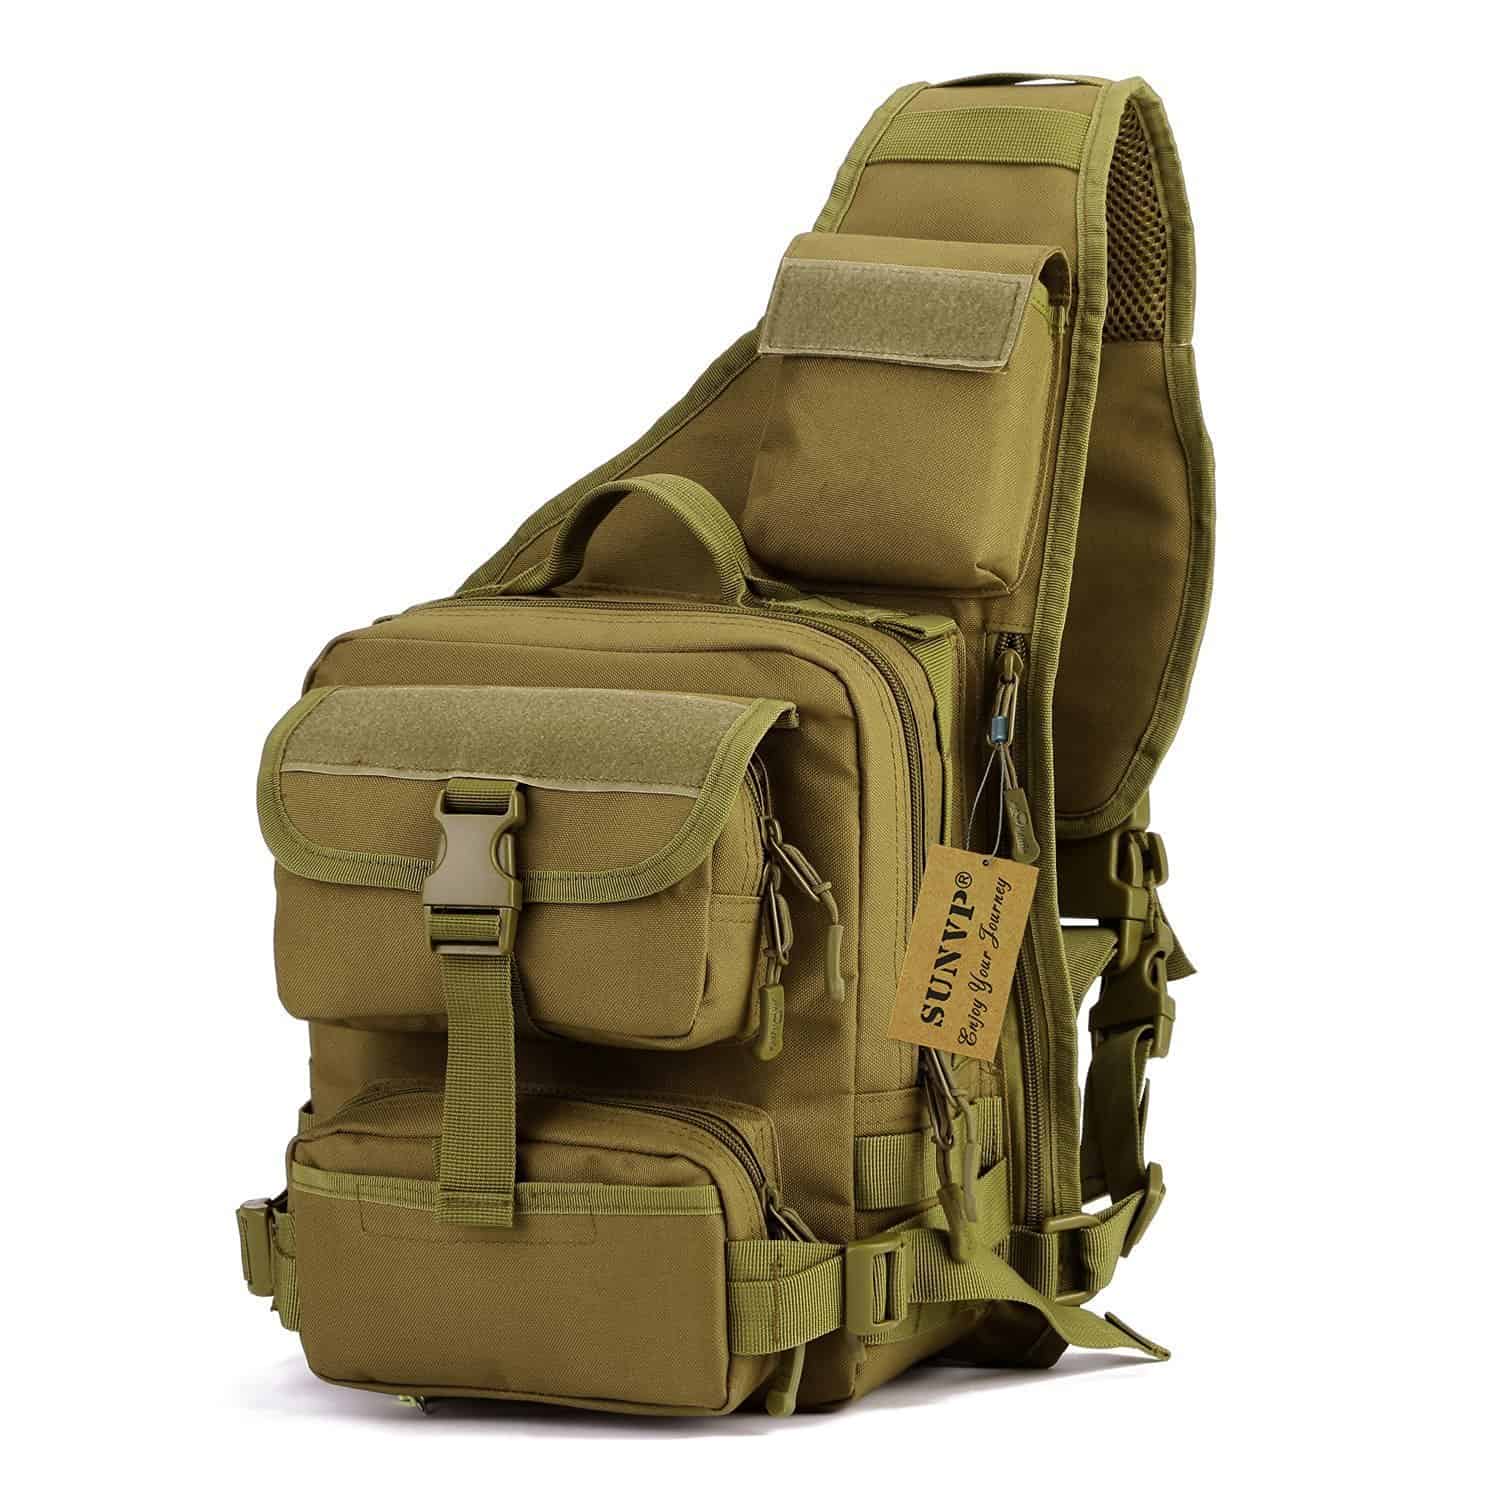 SUNVP Tactical Military Daypack Sling Chest Pack Bag